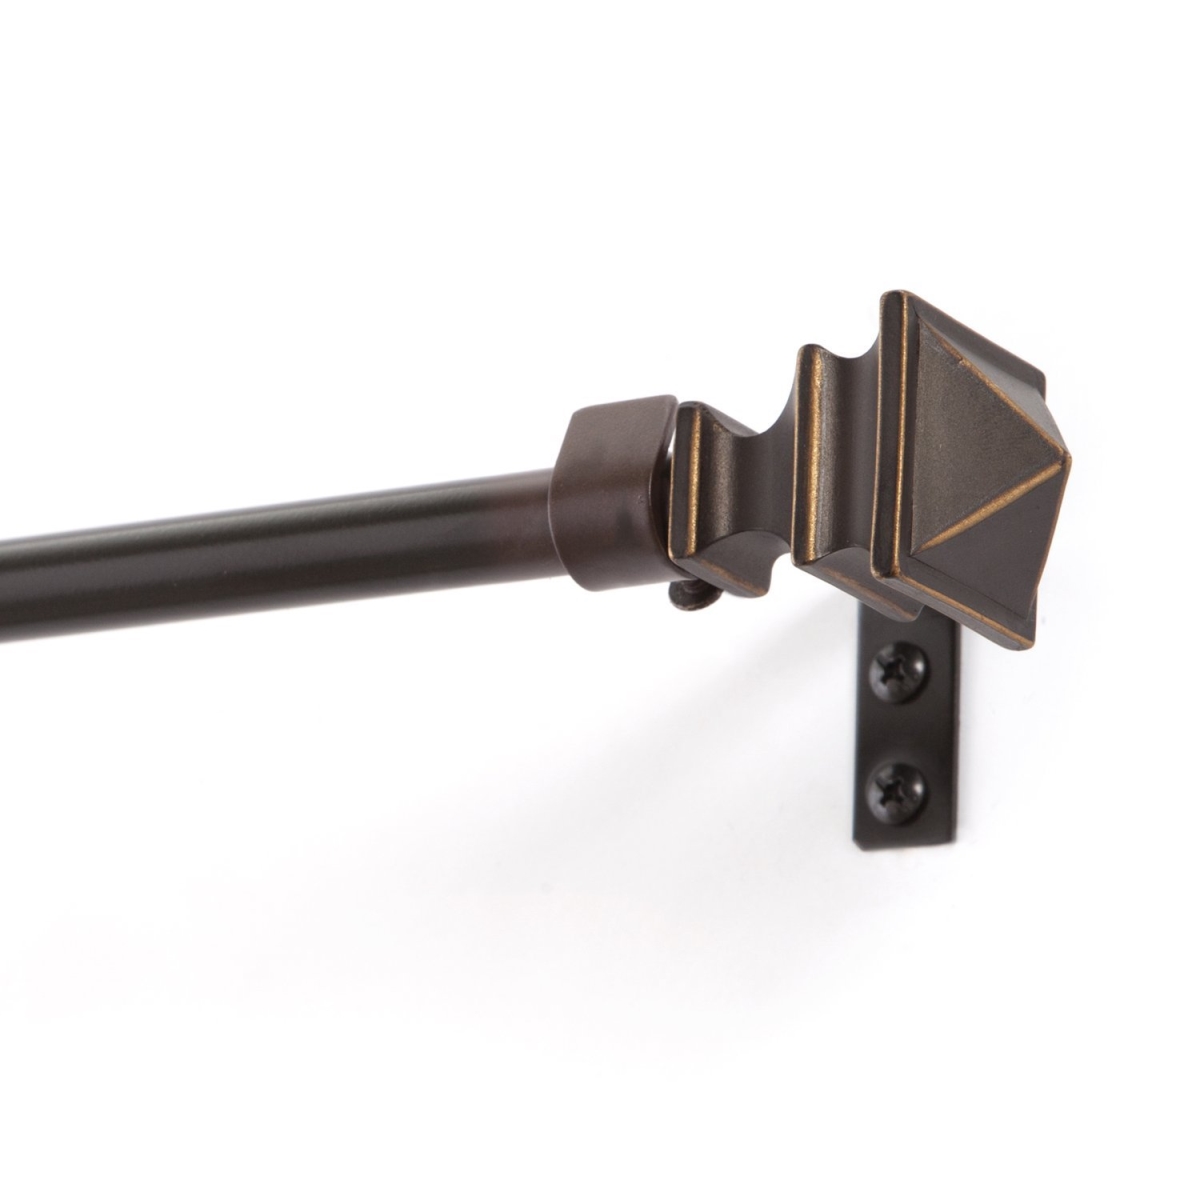 32-1003-8orb 72-144 In. Painted Oil Rubbed Bronze Finish Single Rod Window Hardware With Resin Ribbed Finial